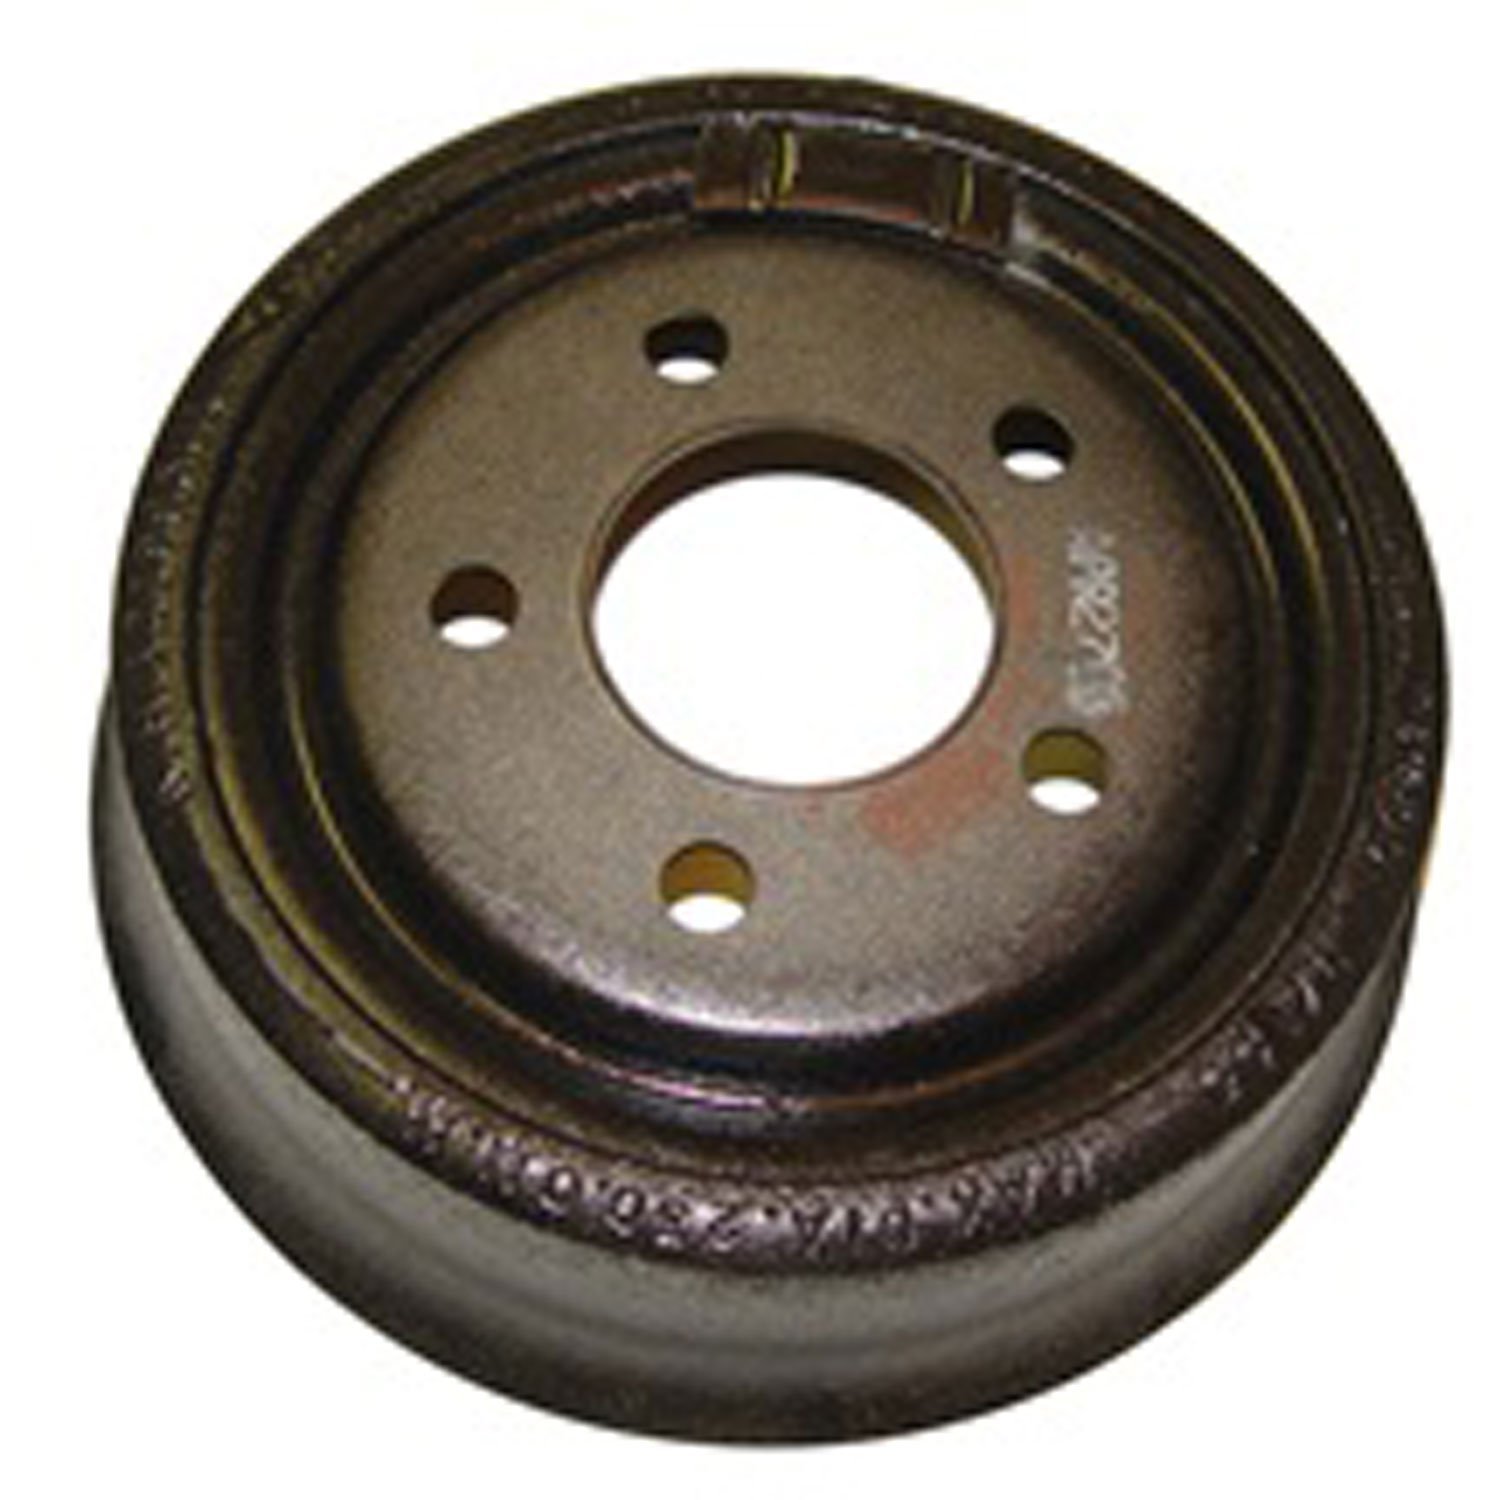 This rear brake drum from Omix-ADA fits the Dana 35 axle on 90-01 Jeep Cherokees and 90-06 Wranglers